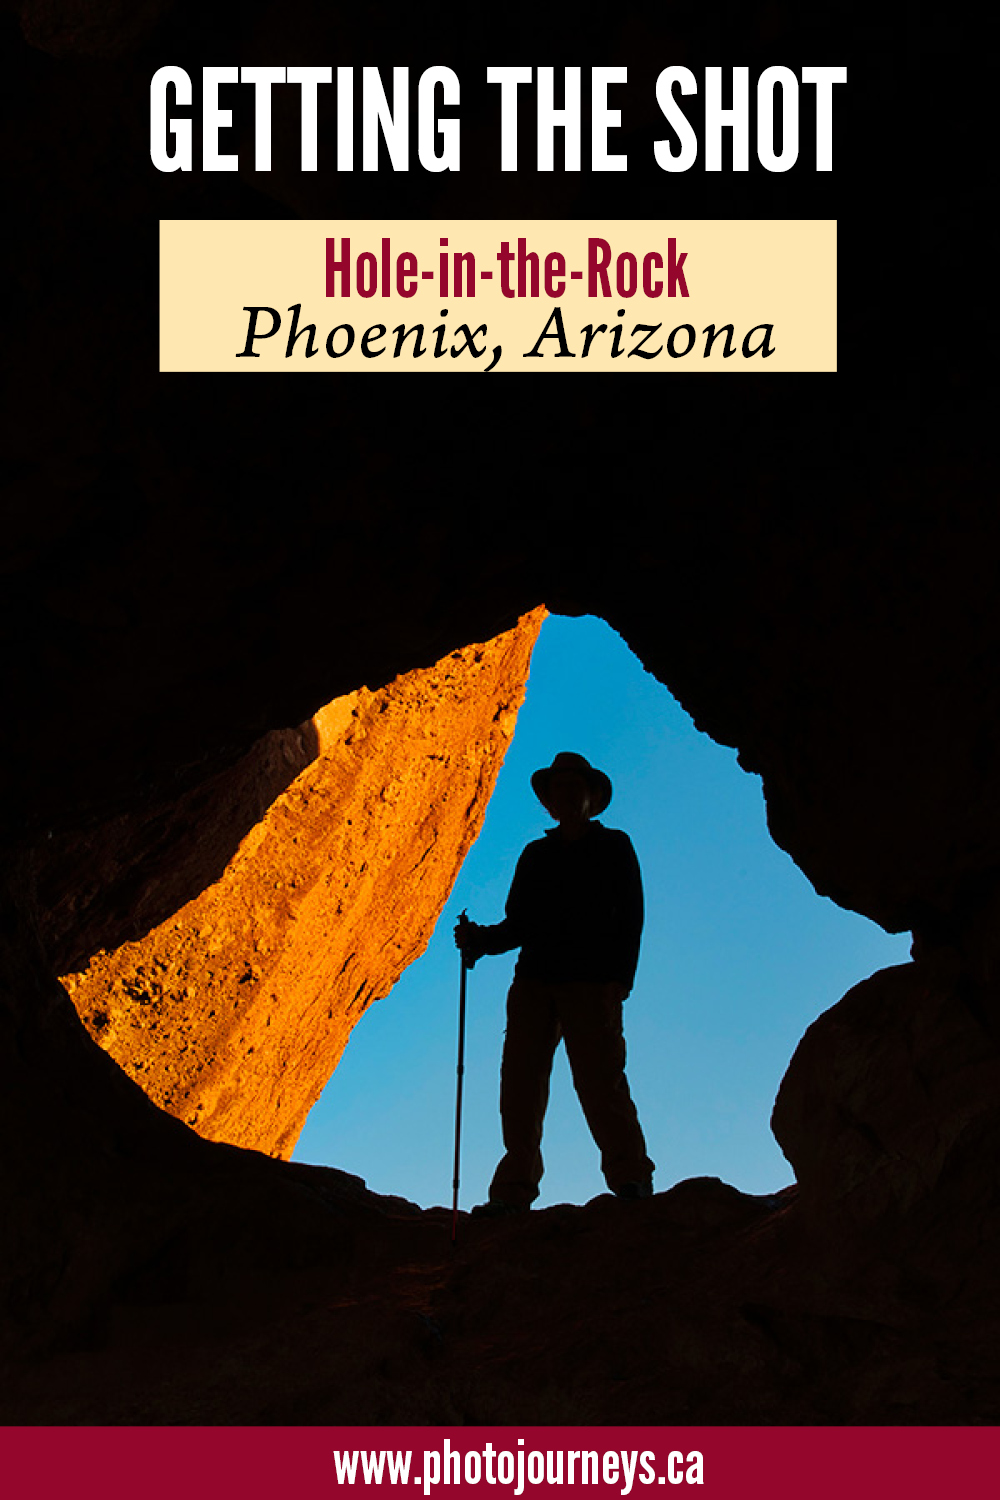 PIN for Getting the Shot, Hole in the Rock, from Photojourneys.ca